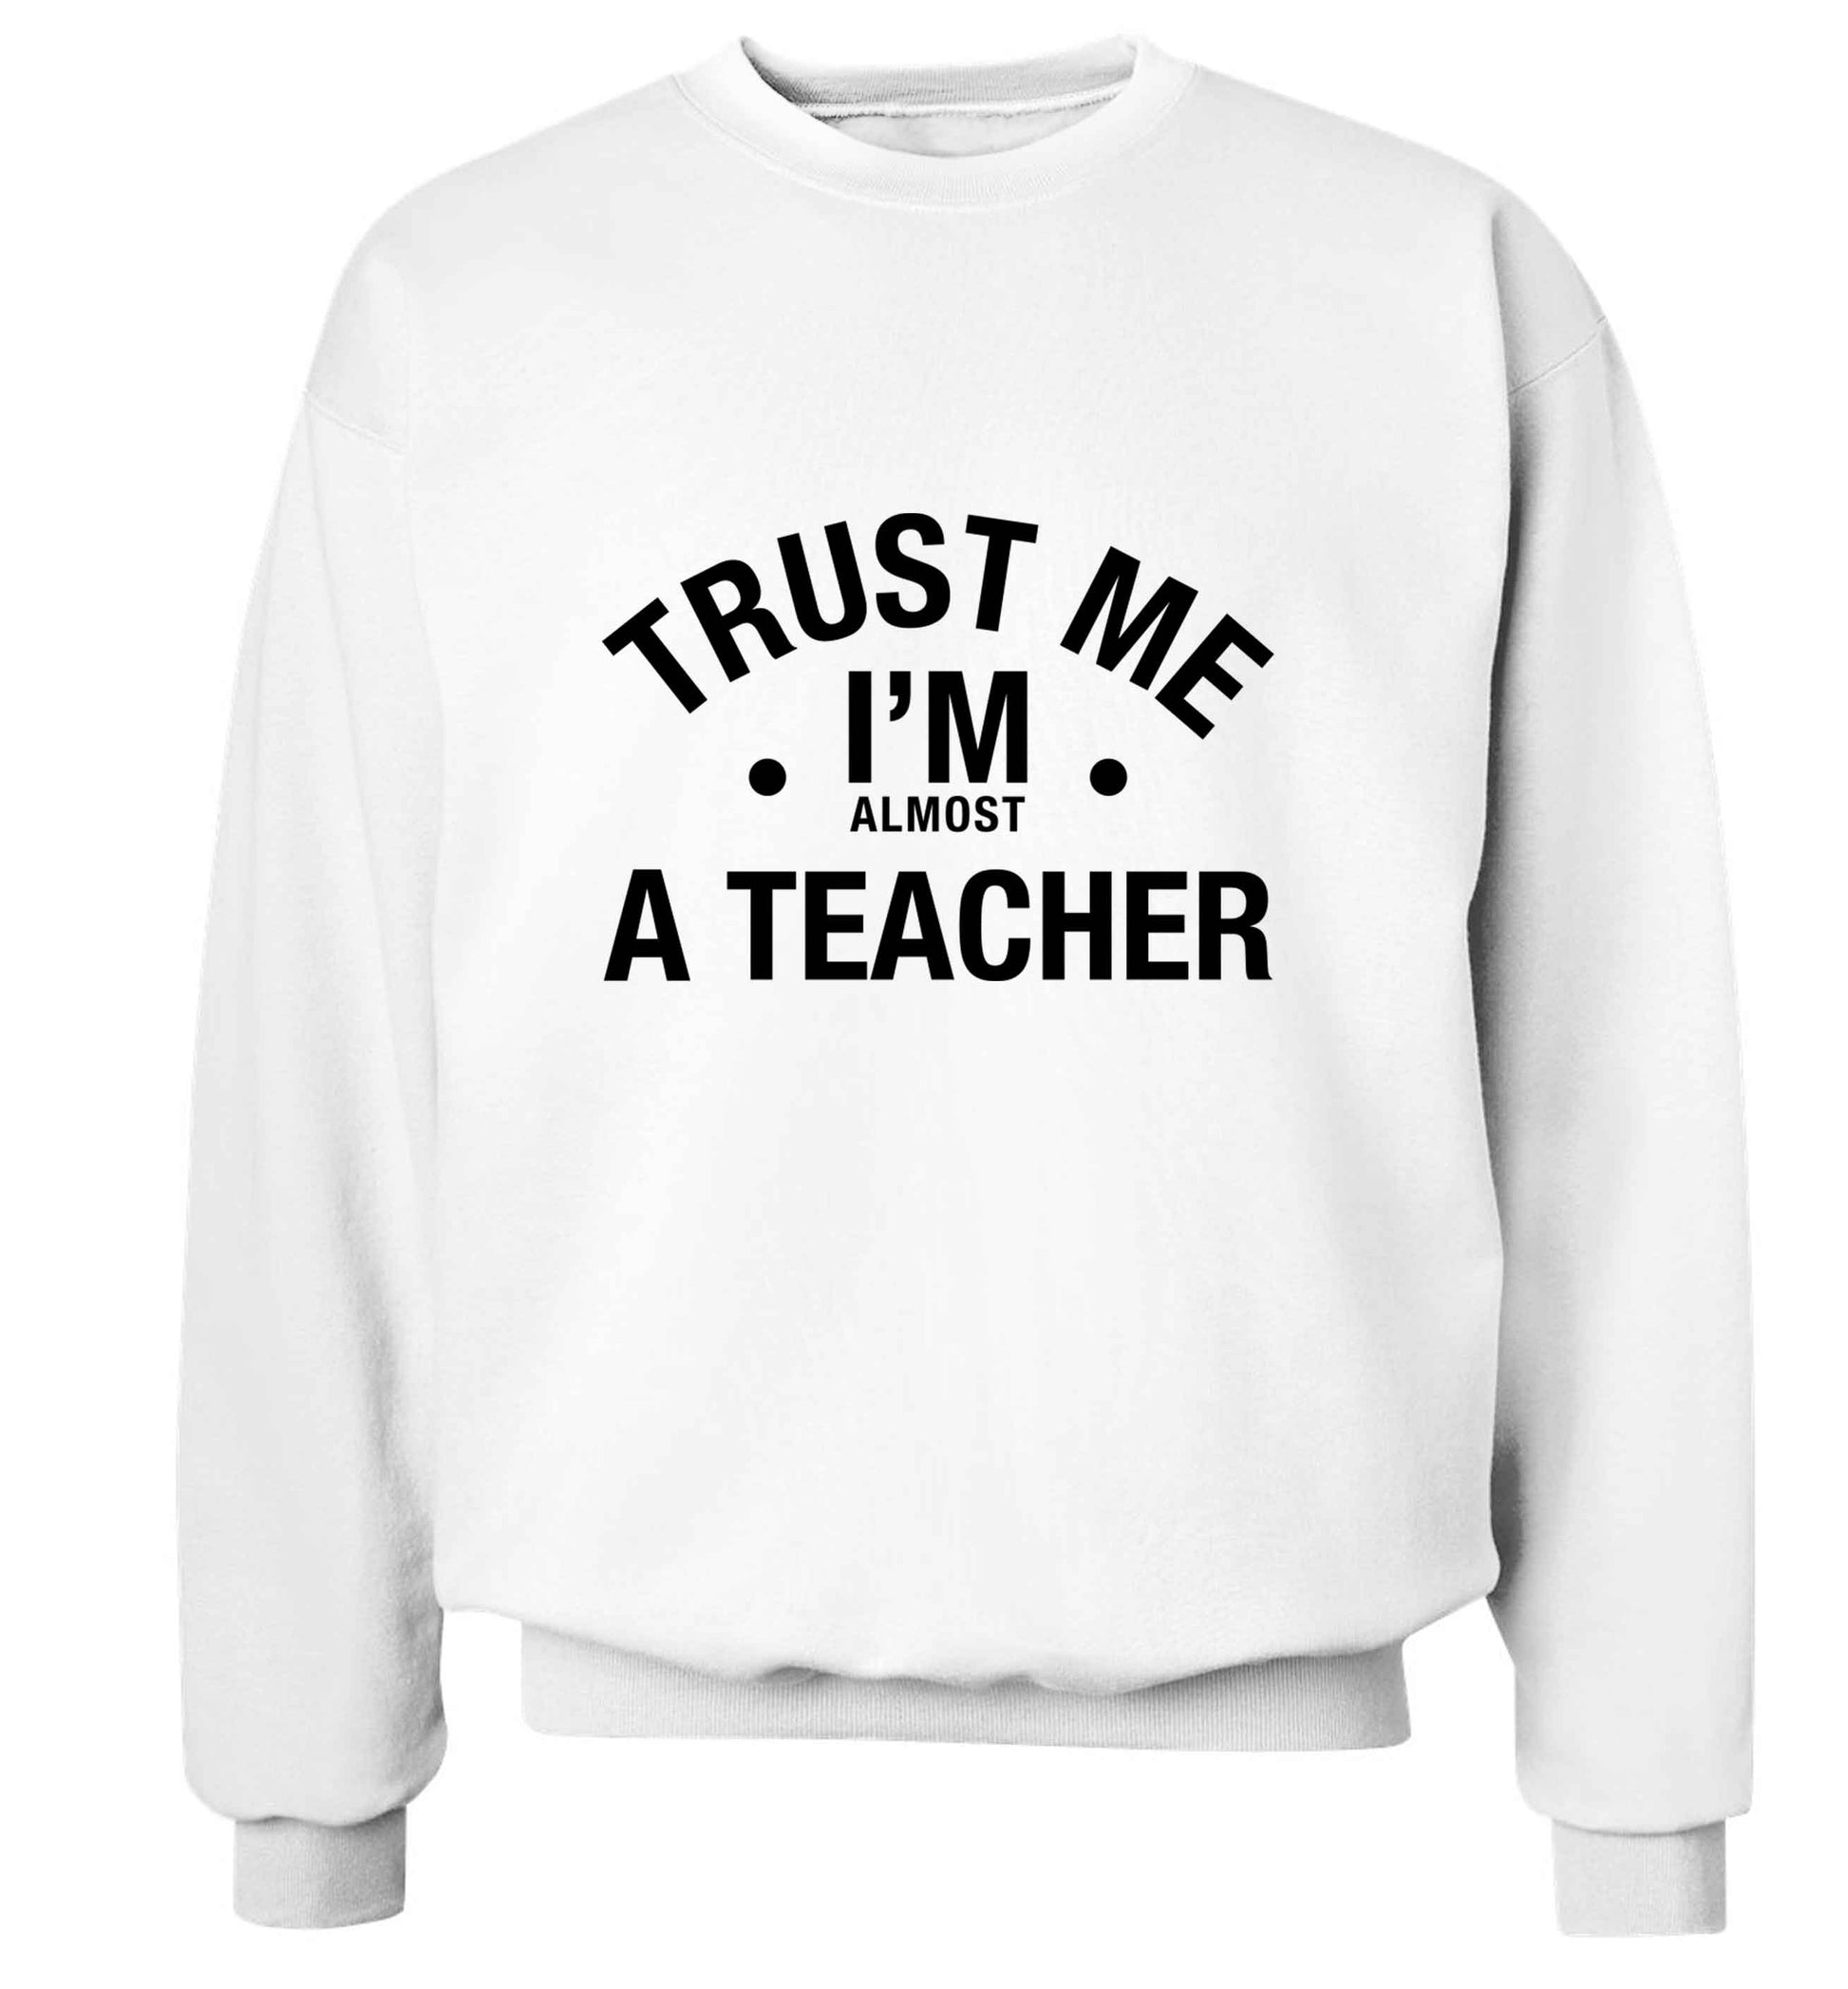 Trust me I'm almost a teacher adult's unisex white sweater 2XL